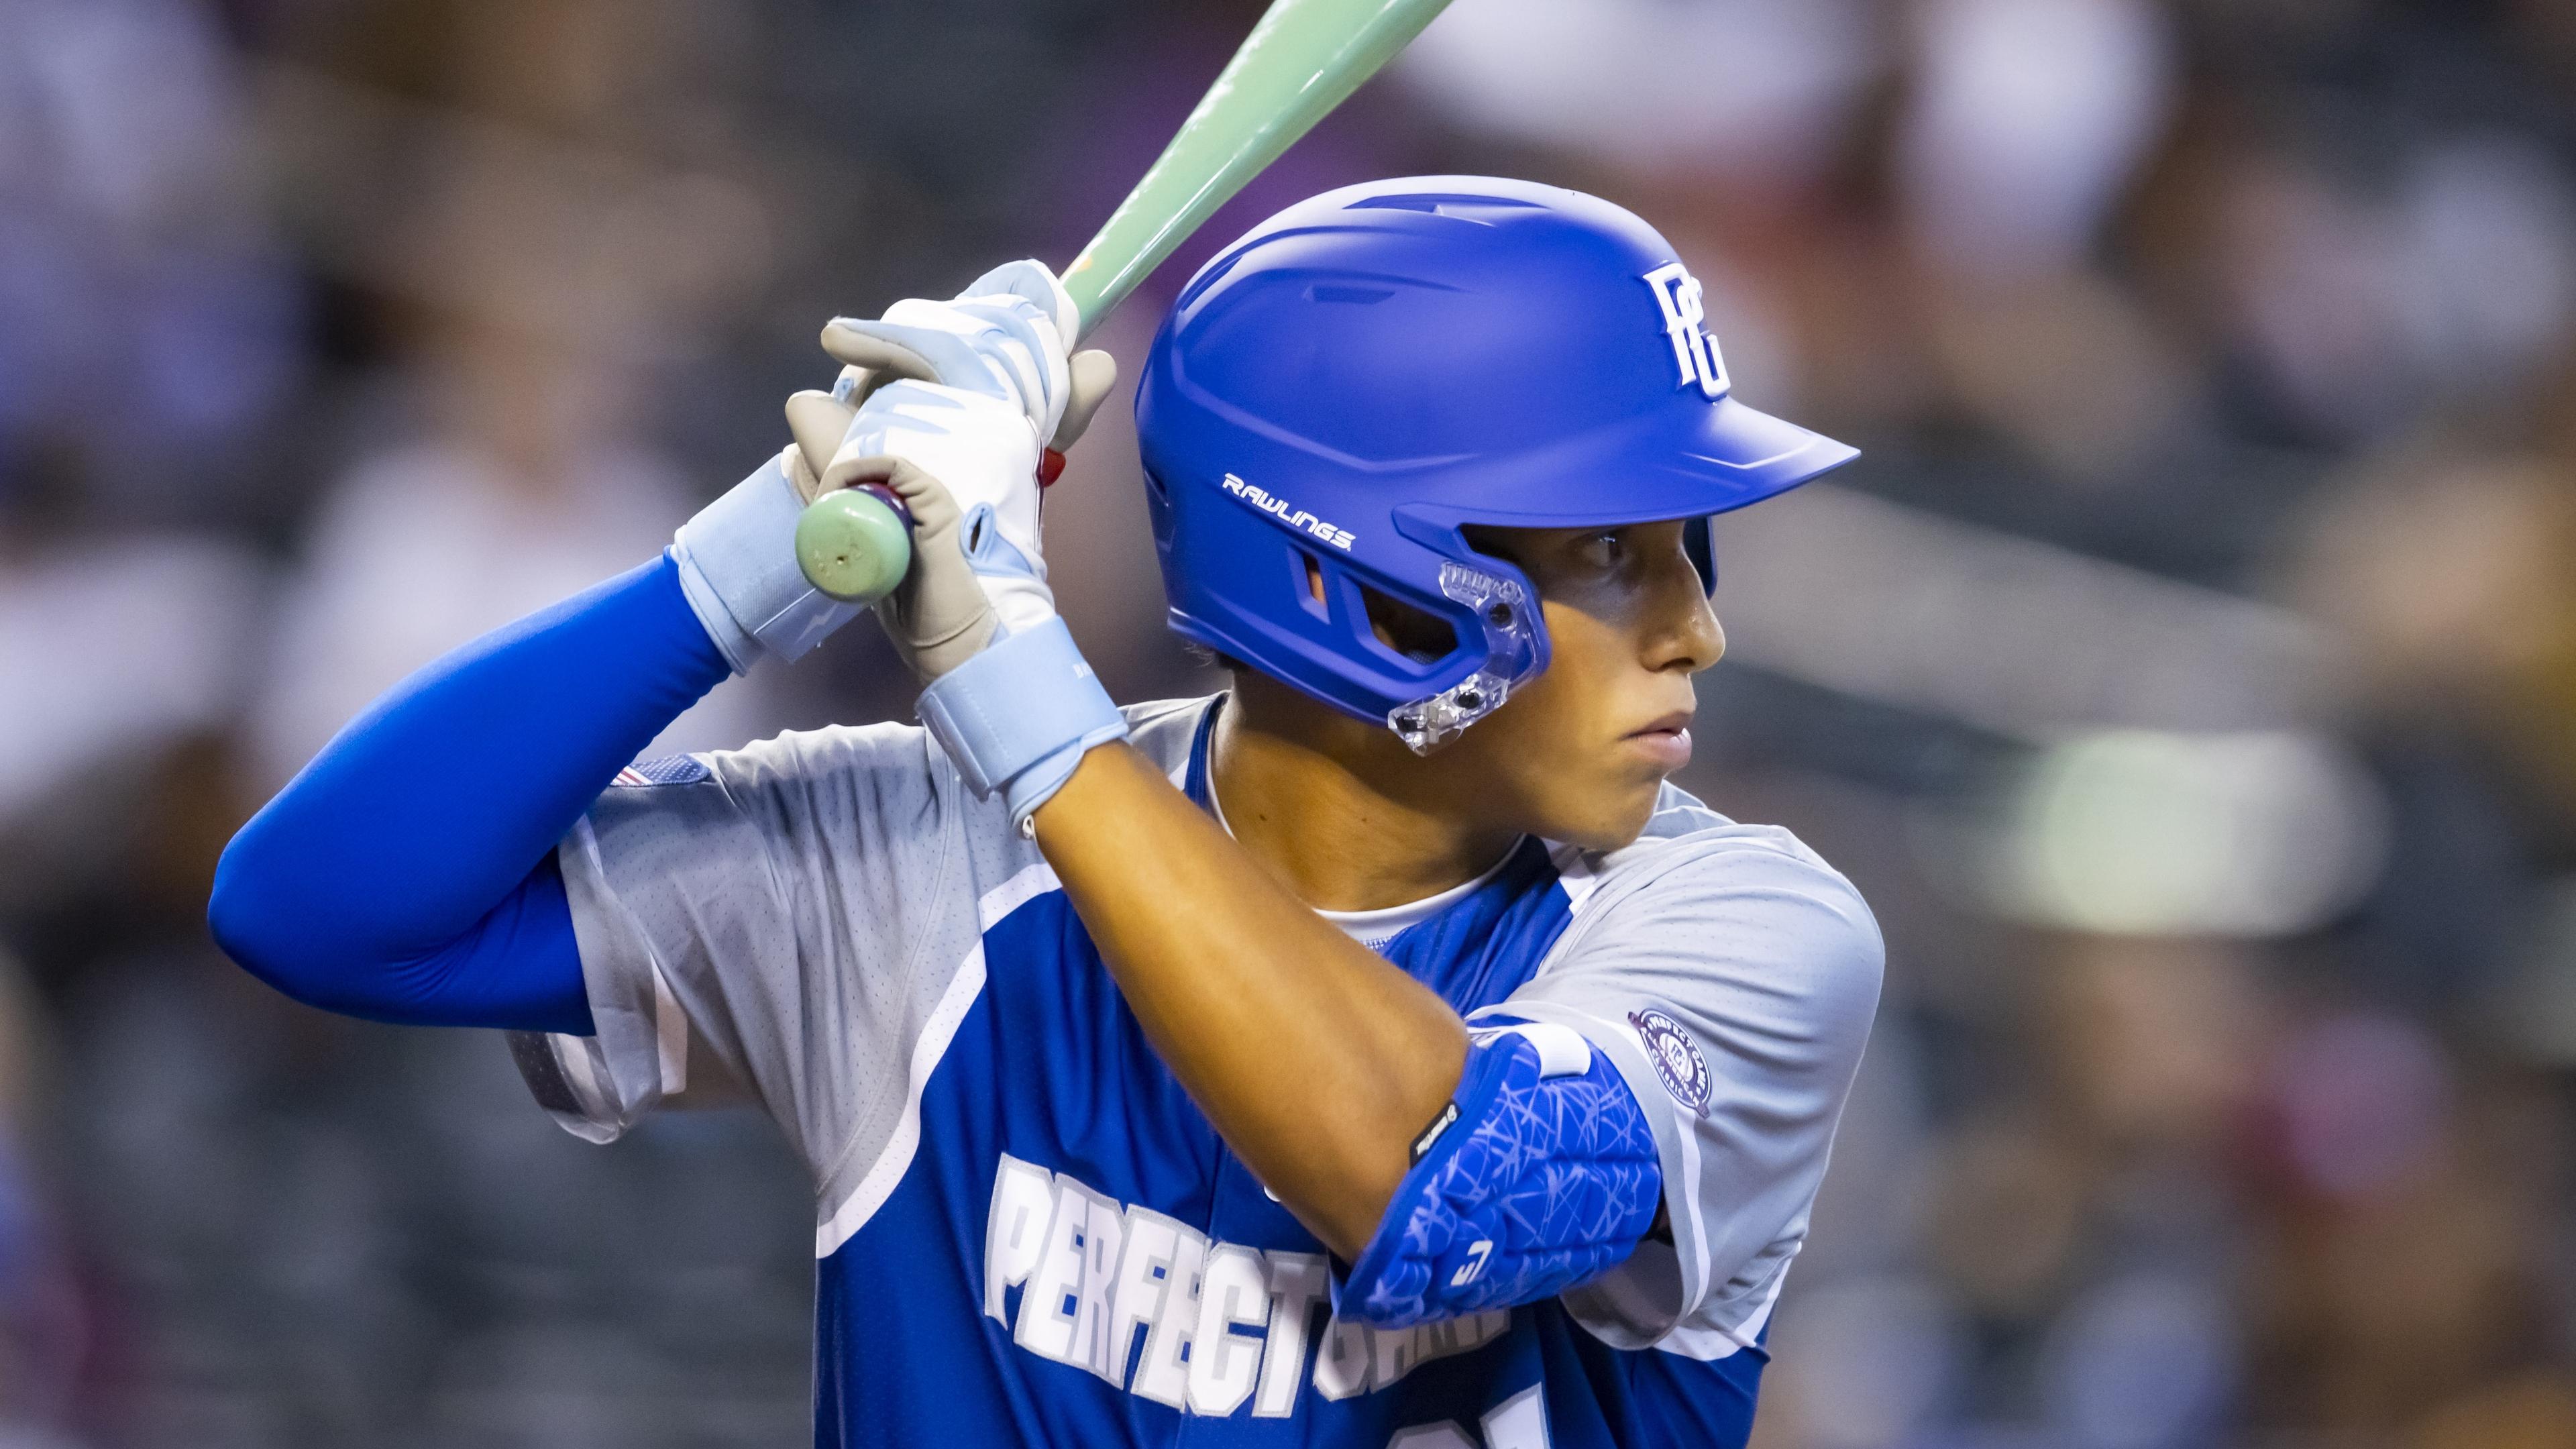 East infielder George Lombard (21) during the Perfect Game All-American Classic high school baseball game at Chase Field / Mark J. Rebilas - USA TODAY Sports